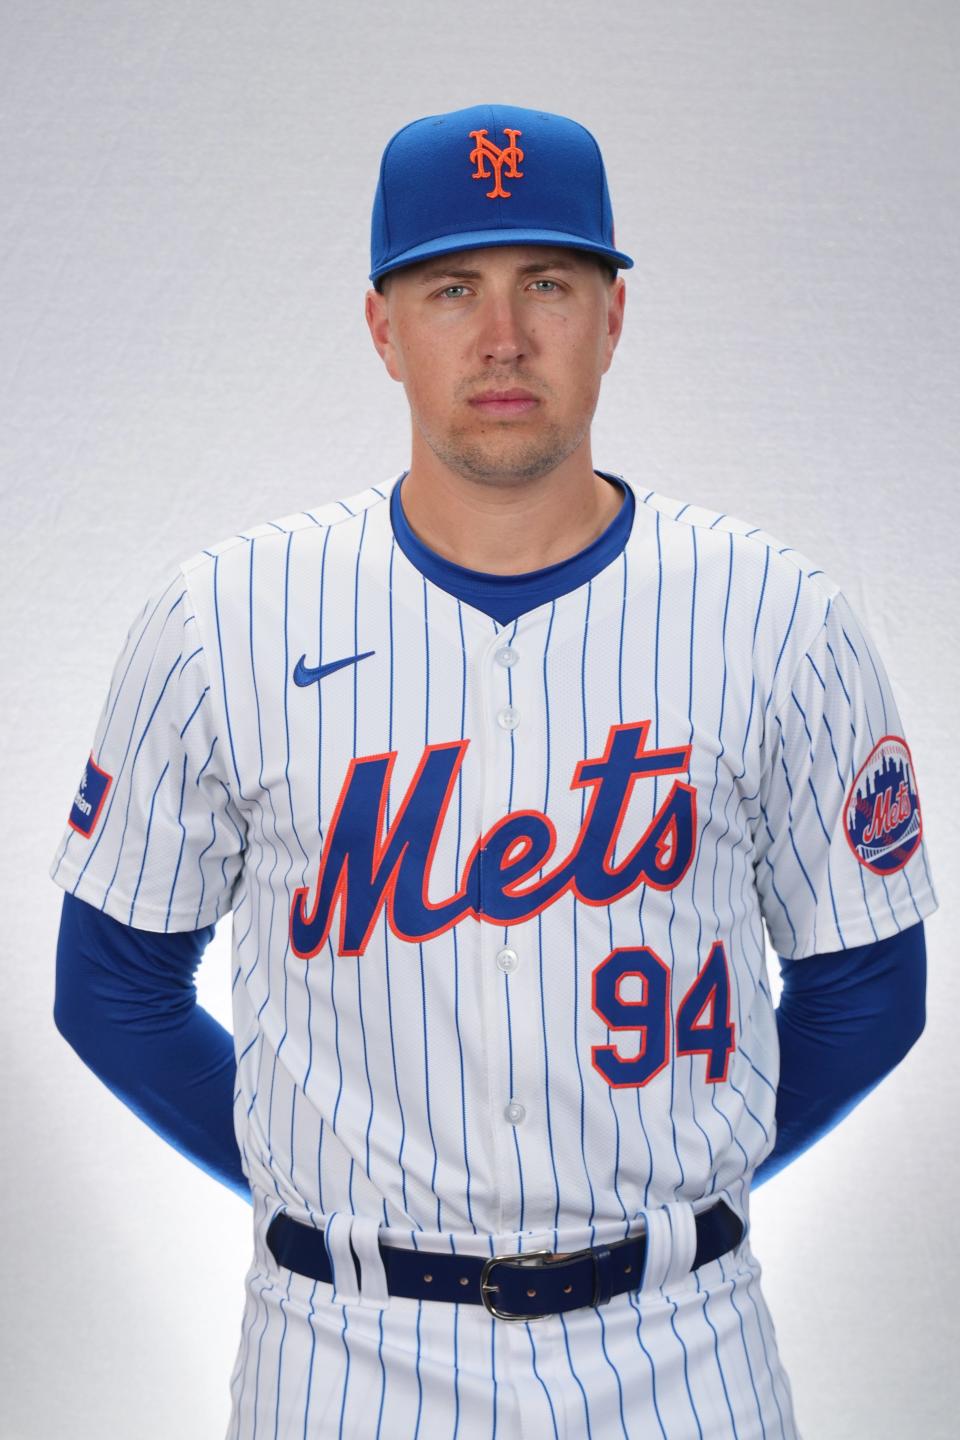 New York Mets pitcher Nate Lavender (94) poses for a photo during media day.